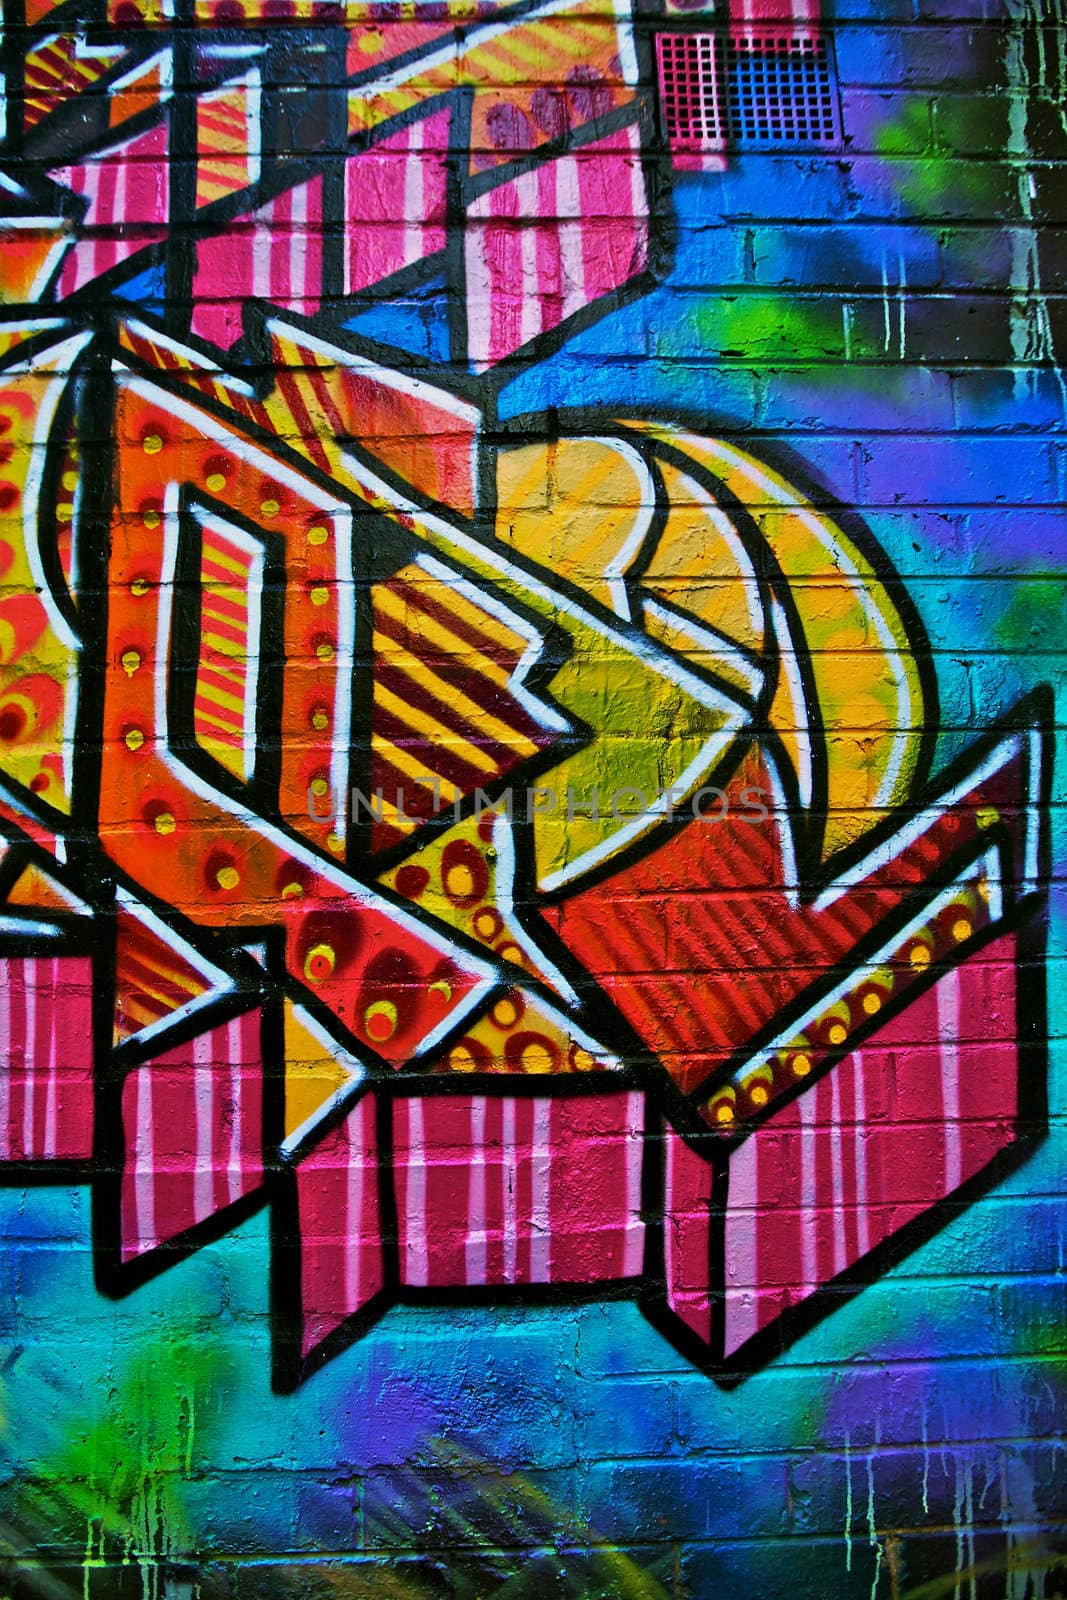 Graffiti design on a wall in the city